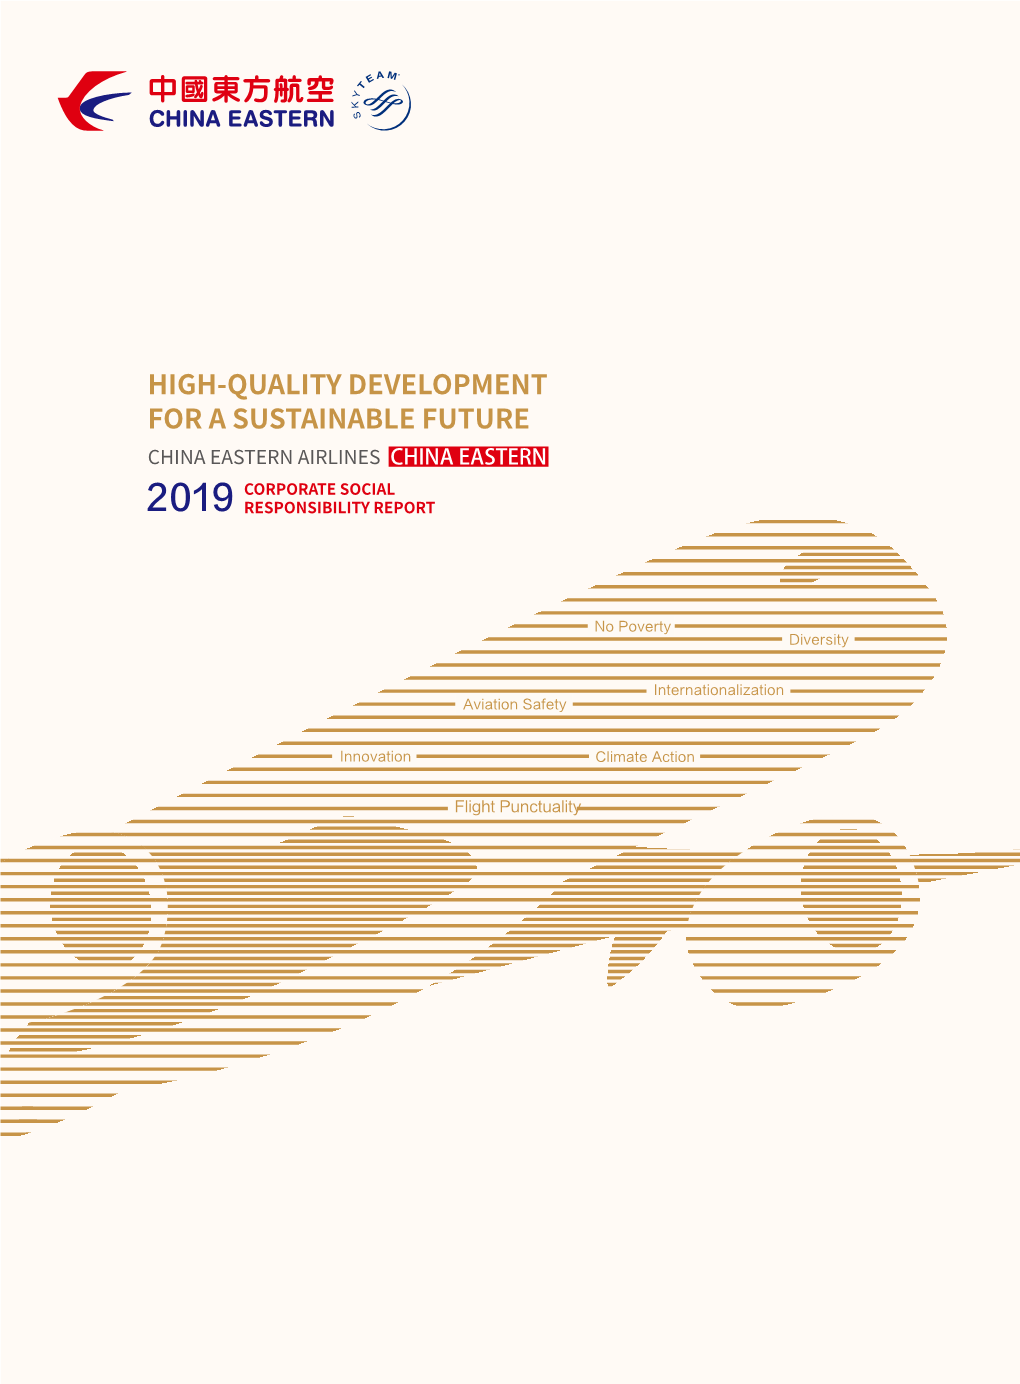 High-Quality Development for a Sustainable Future